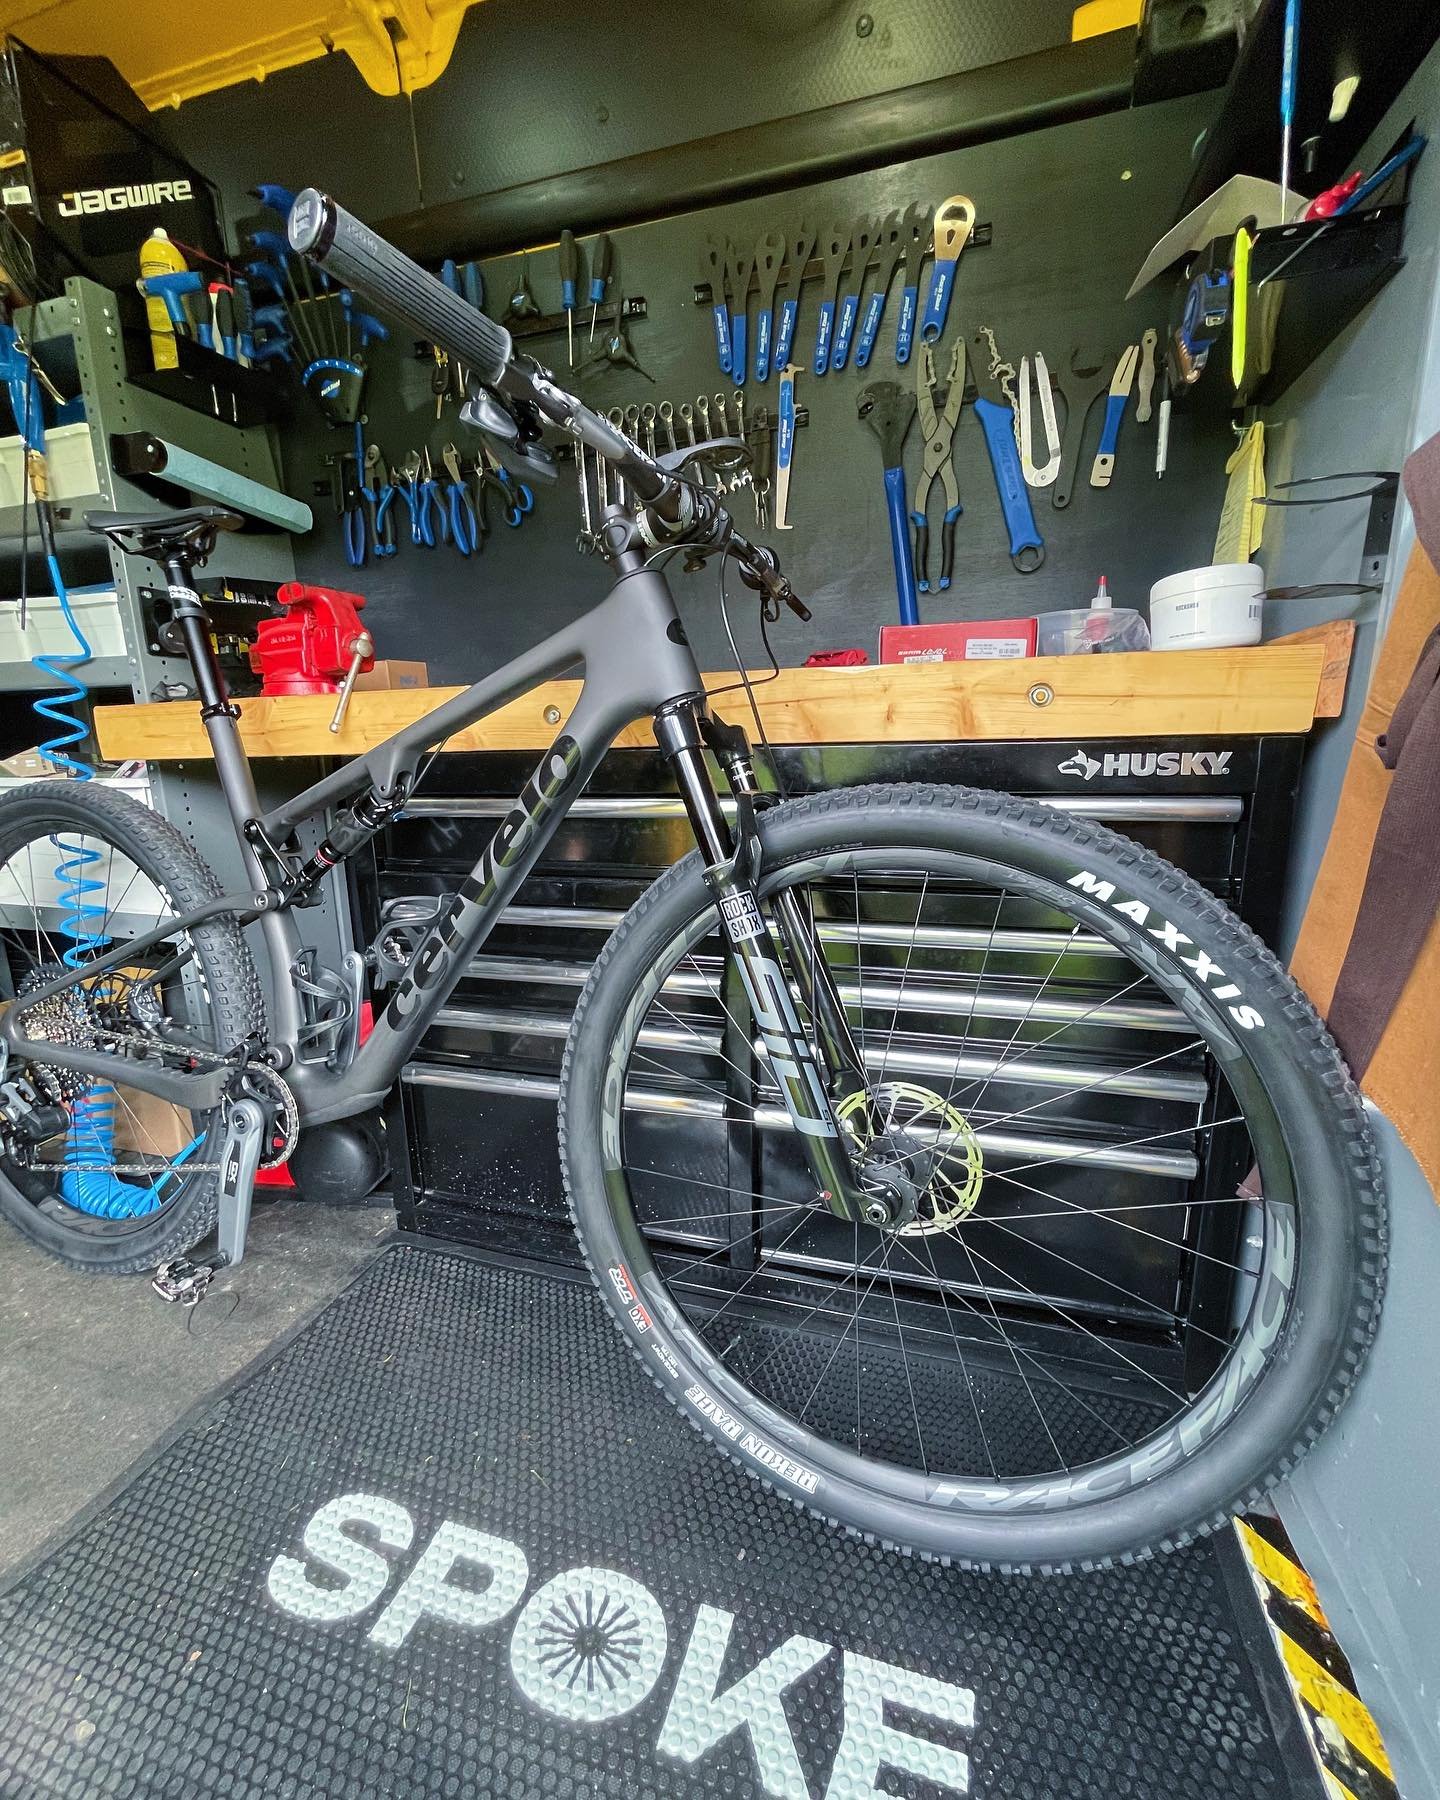 Happy belated new bike day @robertsbowling!

Tubeless setup and a once over and she&rsquo;s ready to go. Good luck at @arcadiagritandgravel 🤙 

#spokebikerepair #mobilebikeshop #cervelomtb #tubelessready #vanlife #ridebikeshavefun